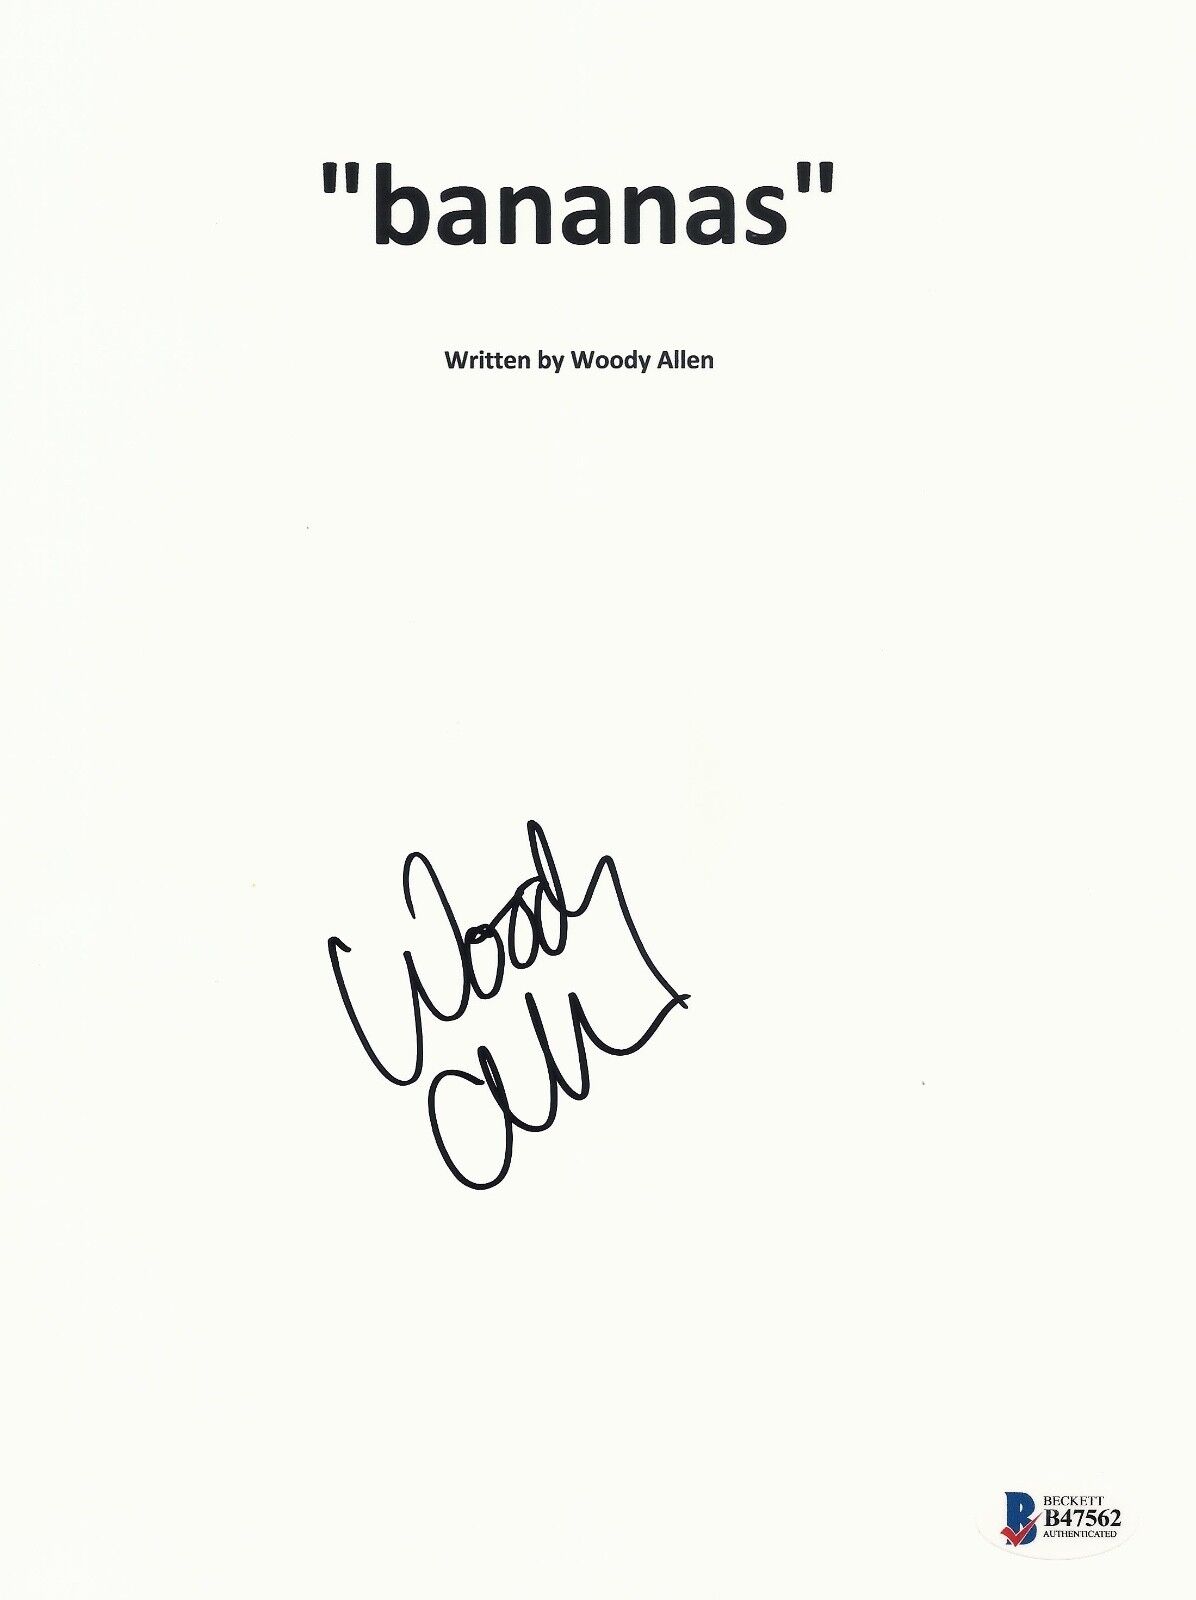 WOODY ALLEN SIGNED AUTO BANANAS SCRIPT FULL 110 PAGE SCREENPLAY BECKETT BAS